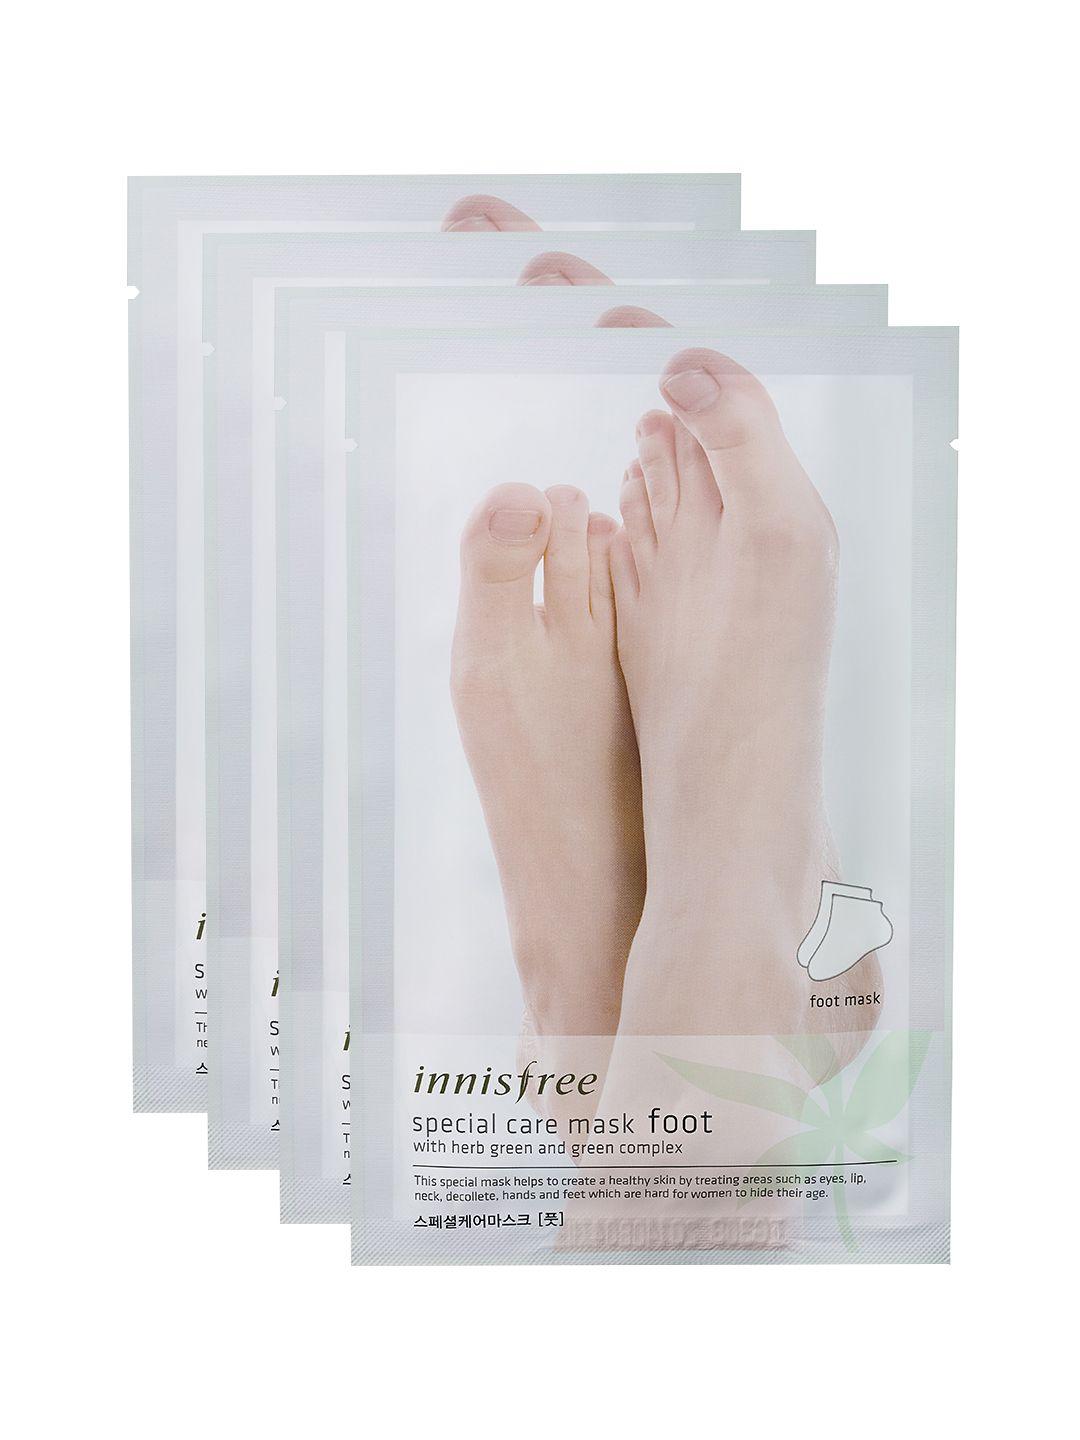 innisfree set of 4 special care foot mask with herb green & green complex - 20 ml each